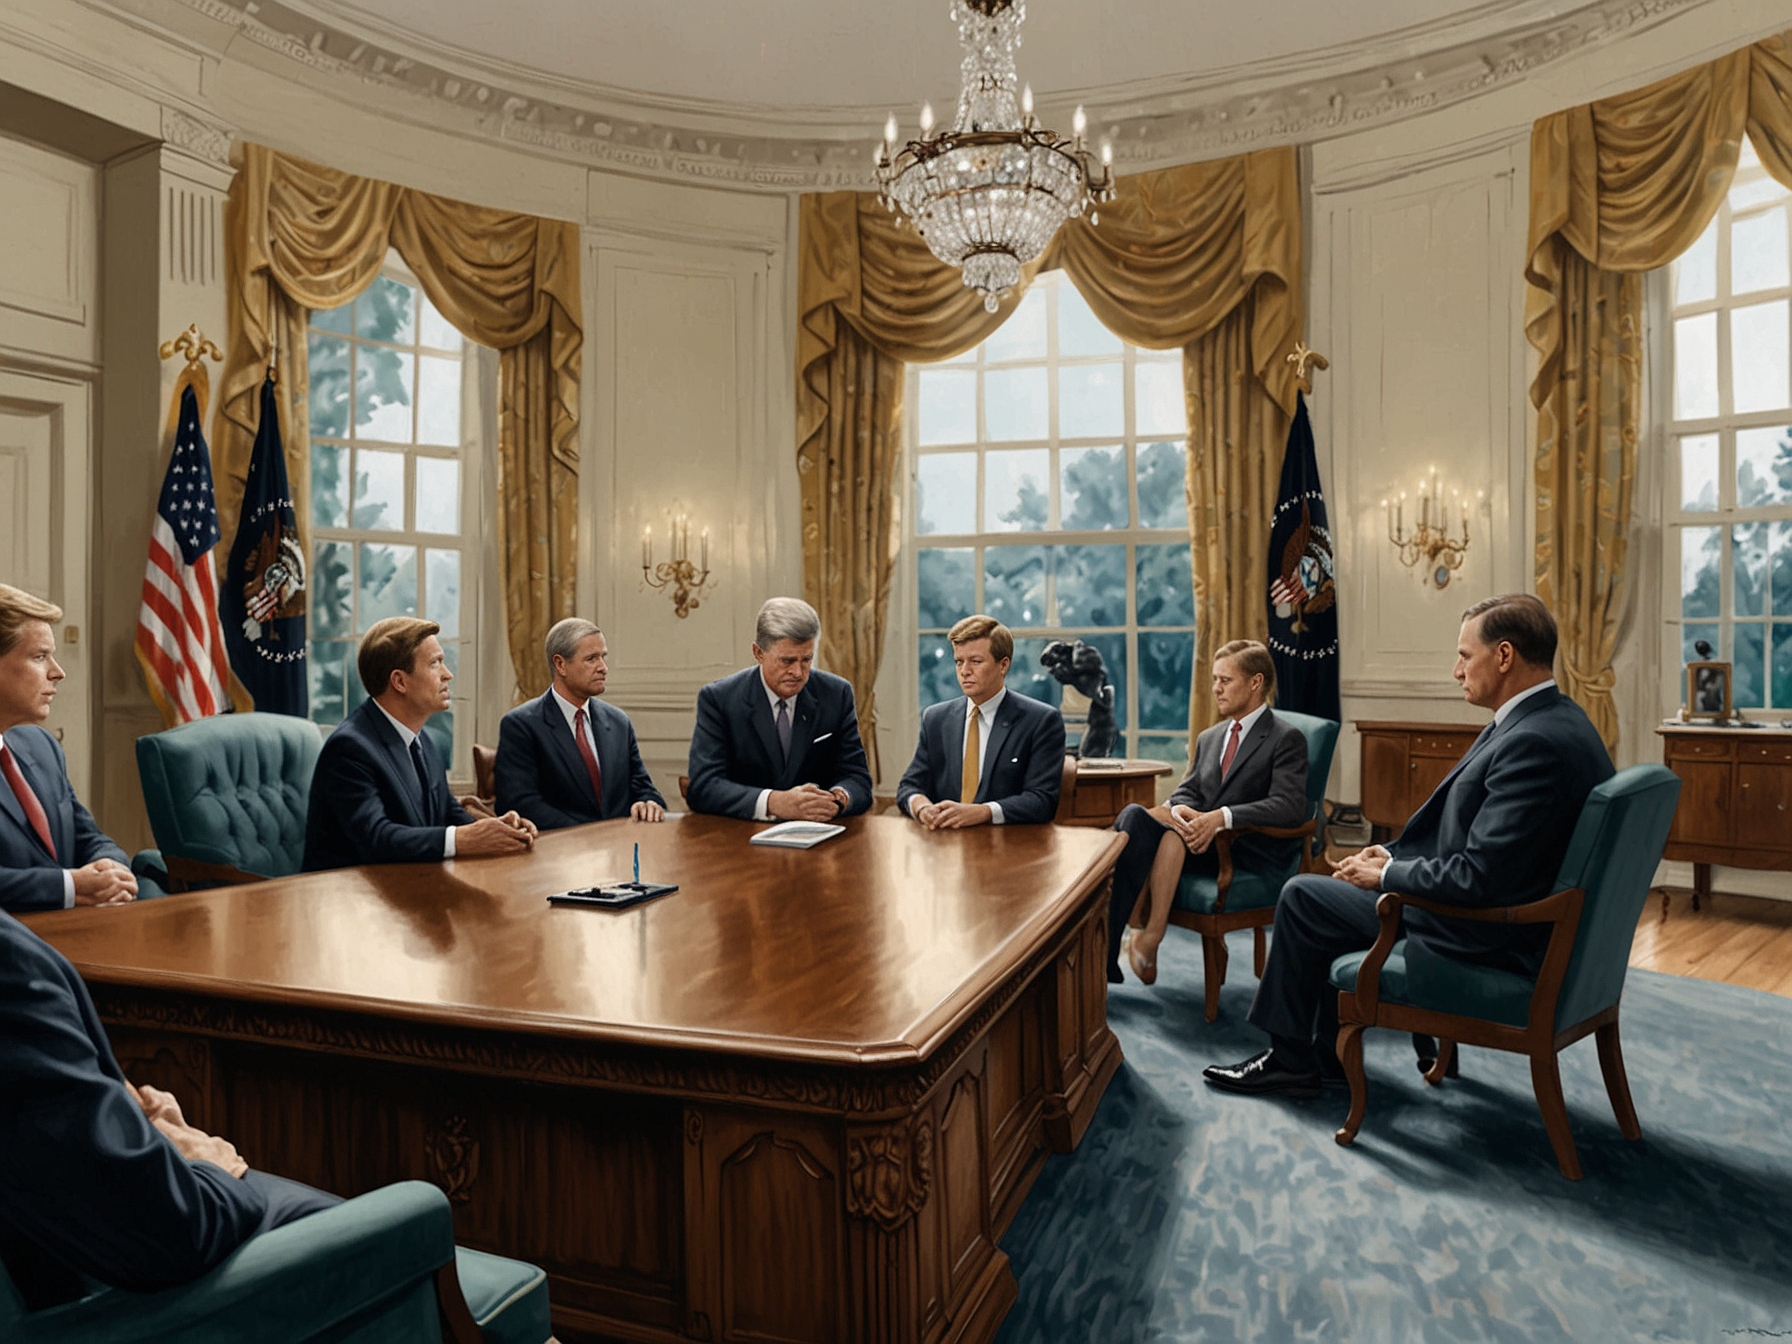 An AA meeting taking place in a symbolic White House setting, representing Kennedy's proposal to destigmatize addiction and demonstrate that recovery is possible regardless of one's status.